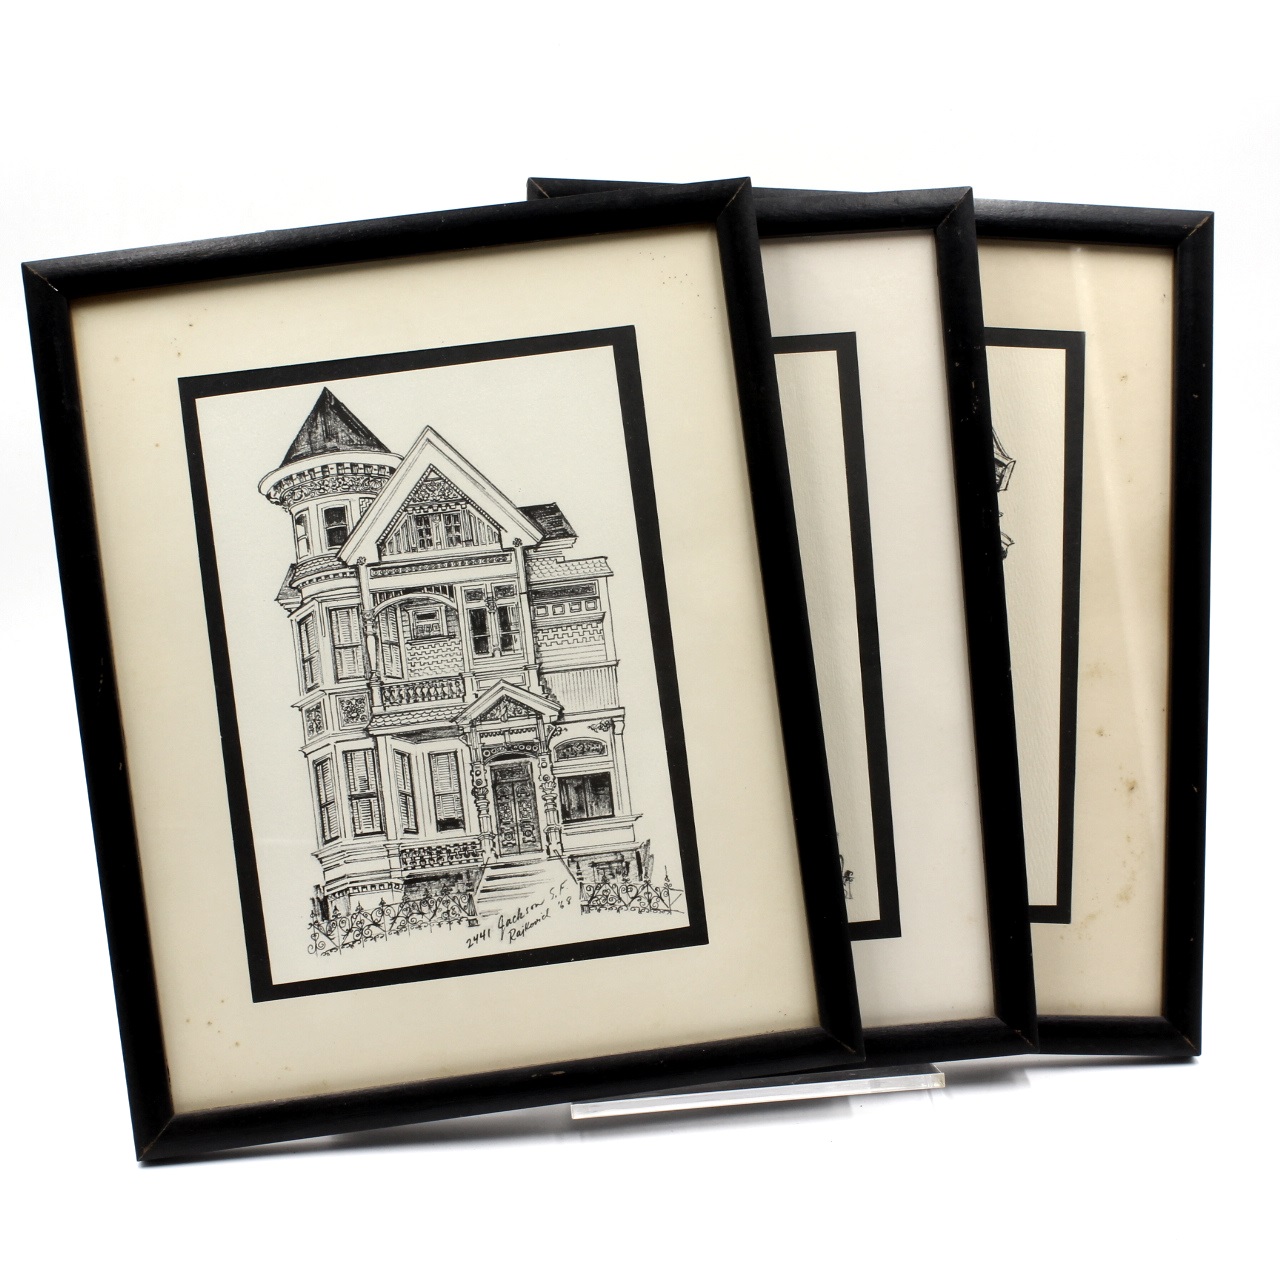 Maxine Rajkovich, Lot of 3 Etchings, Victorian Houses